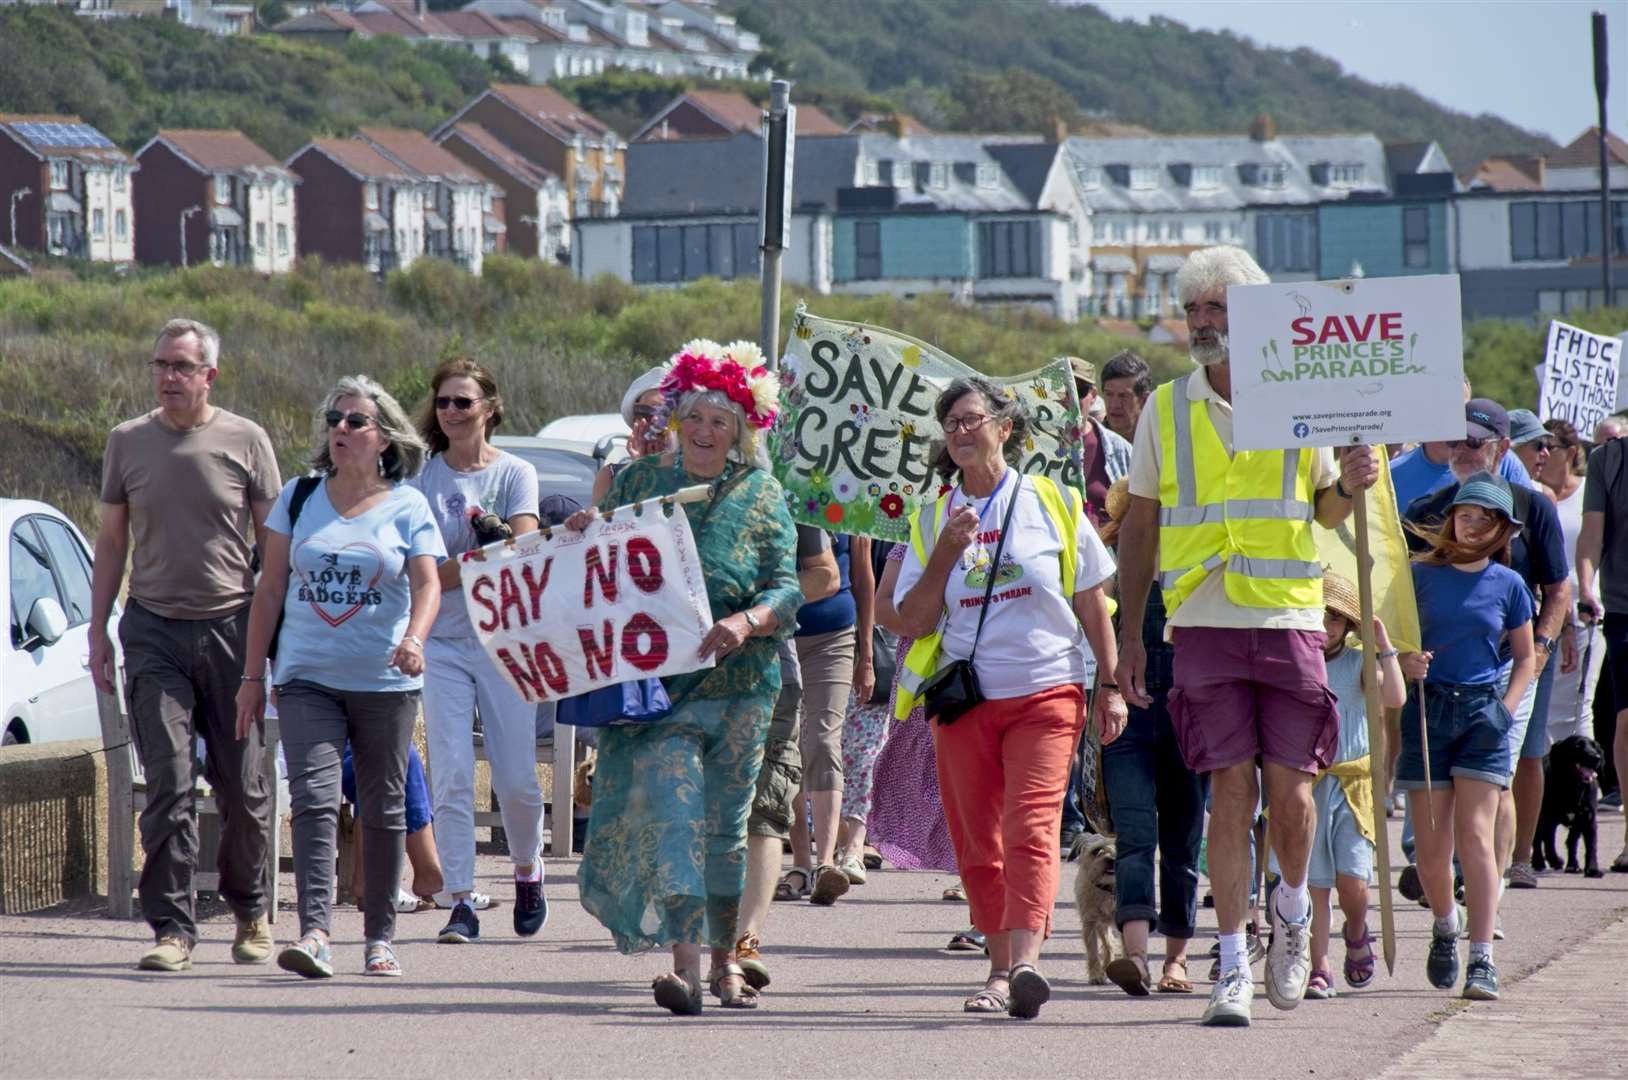 Protest over the development last August. Picture: James Willmott